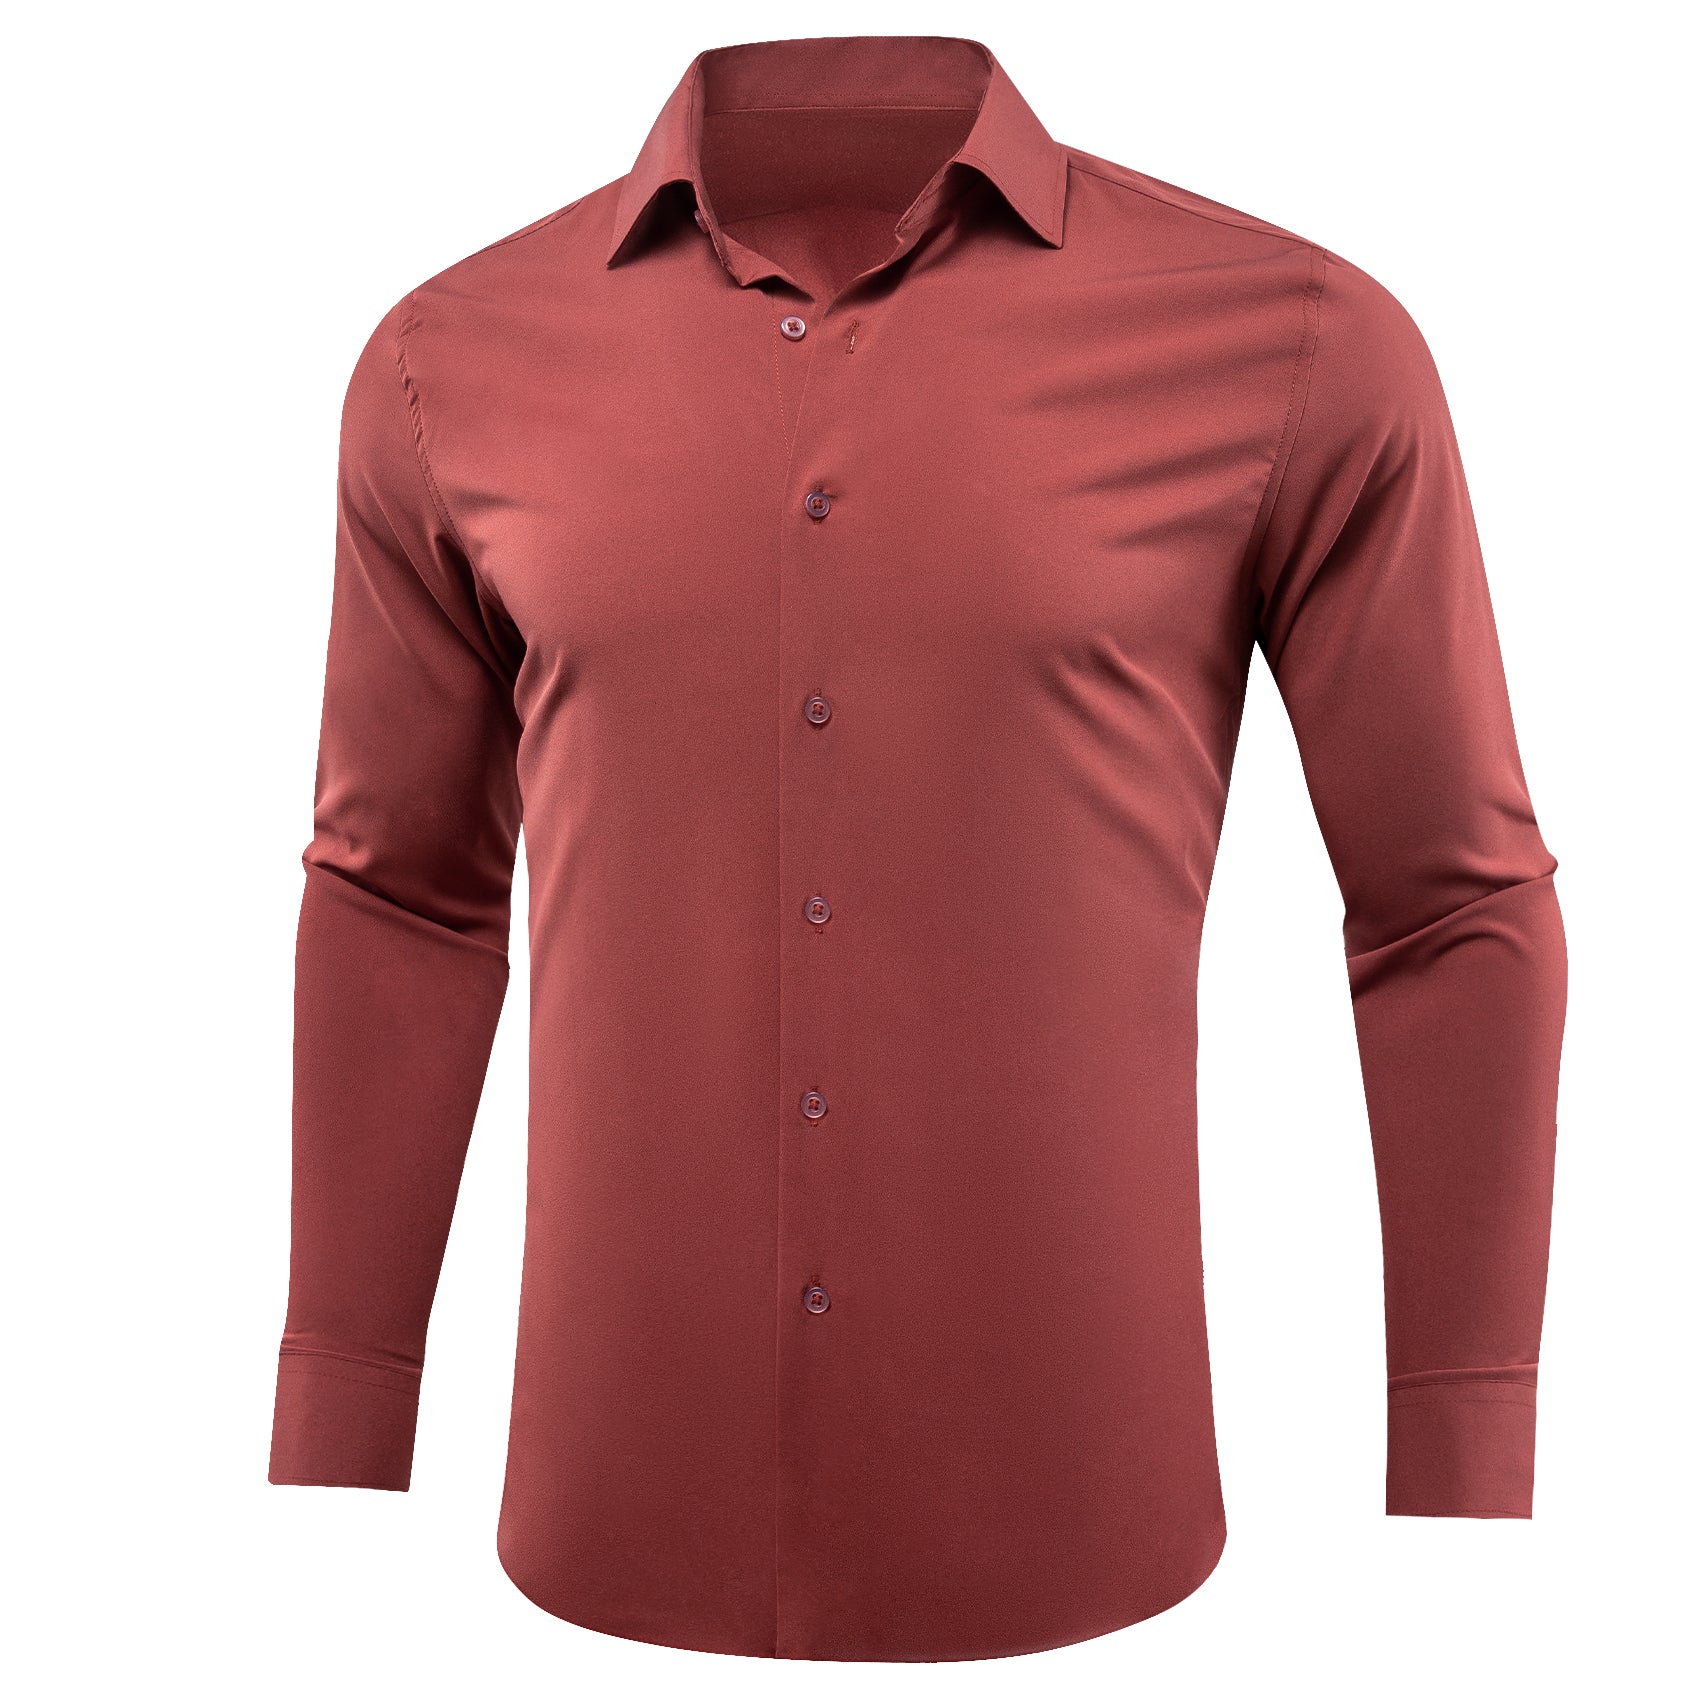 Barry.wang Indianred Solid Silk Shirt